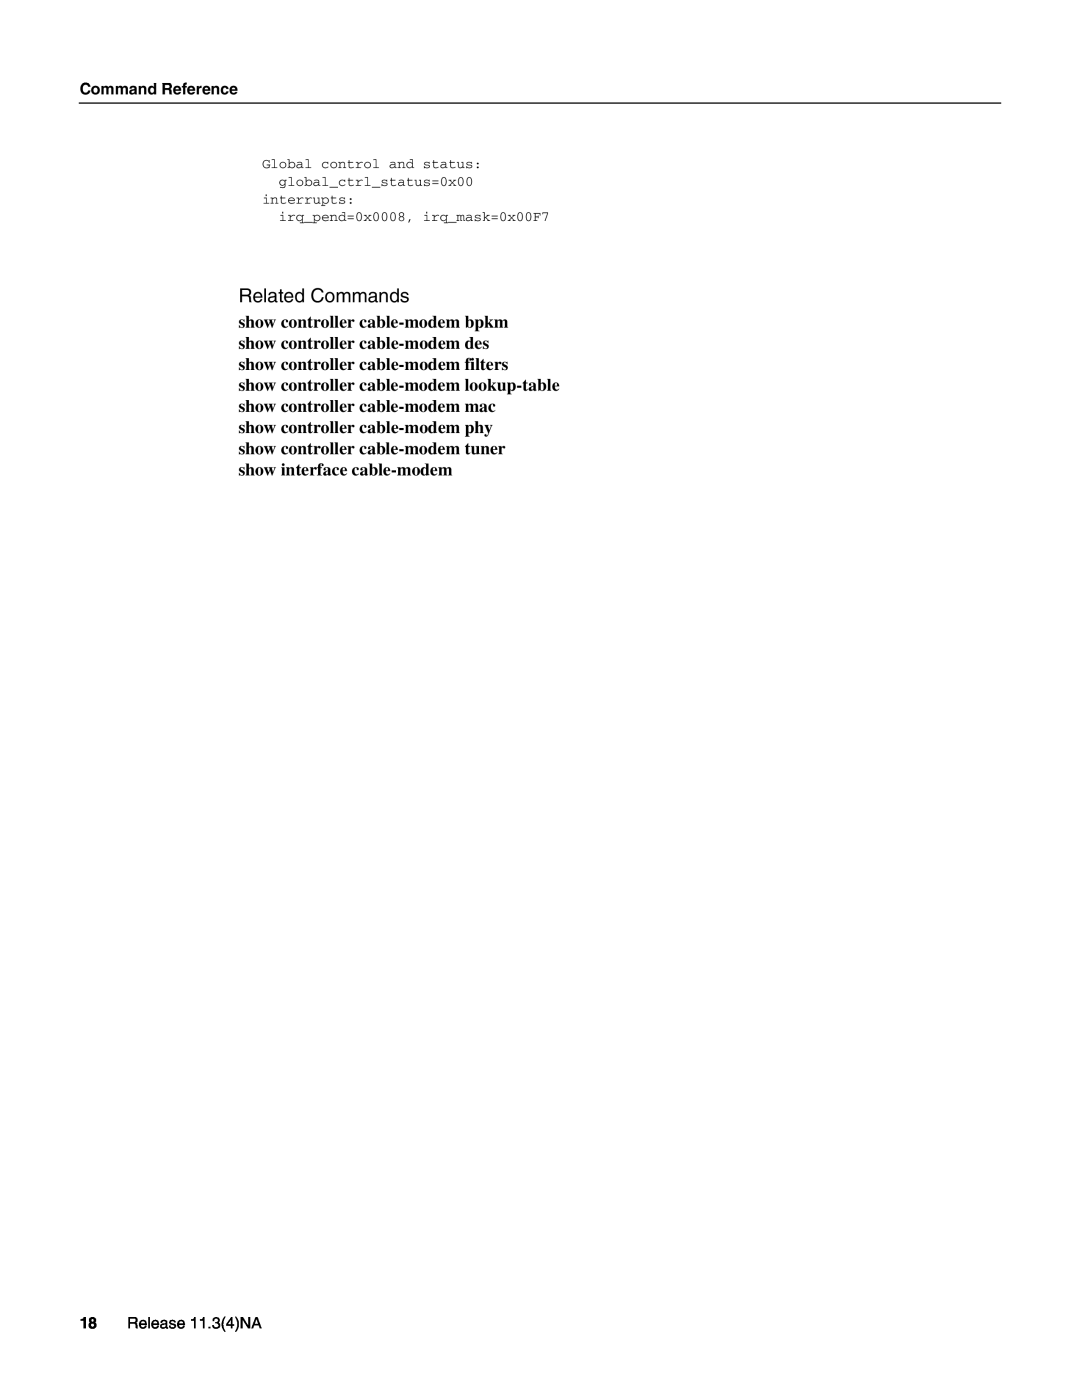 Cisco Systems UBR904 manual Related Commands, Release 11.34NA 